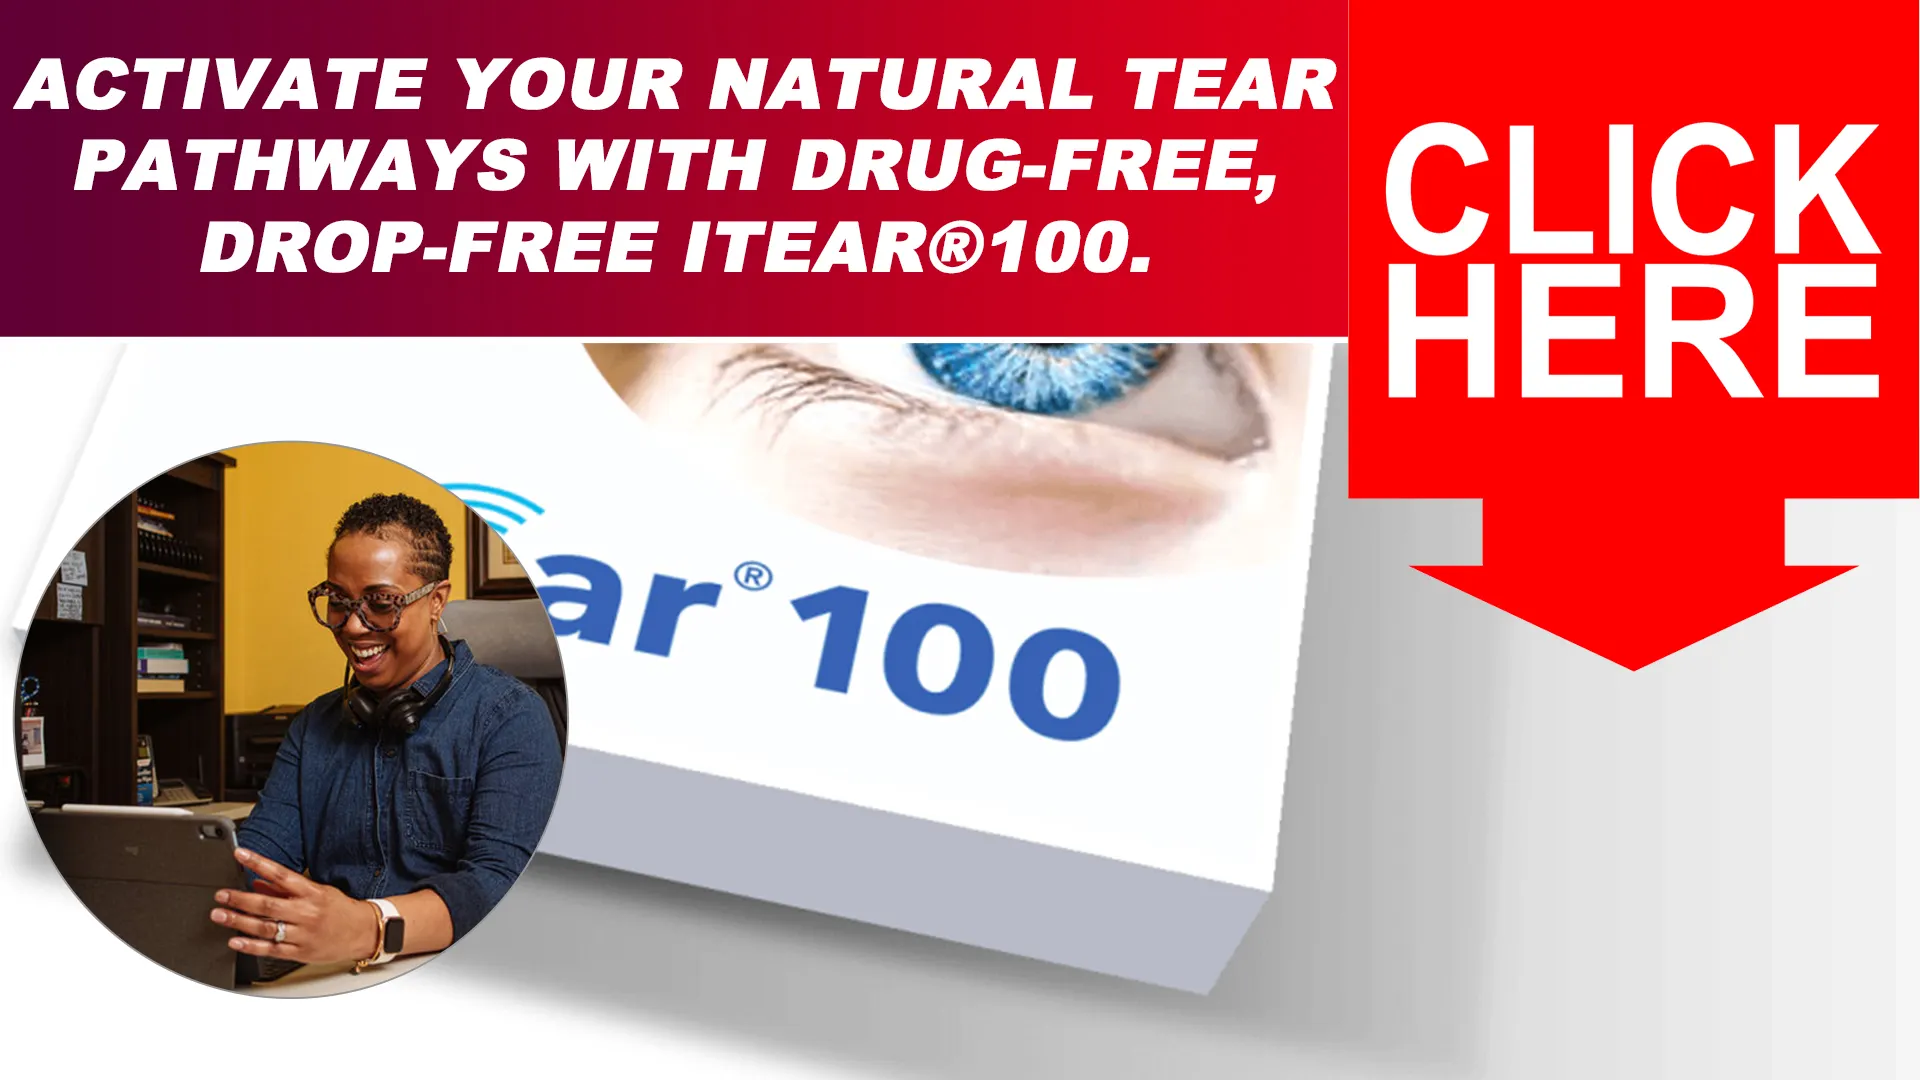 Getting Started with iTEAR100